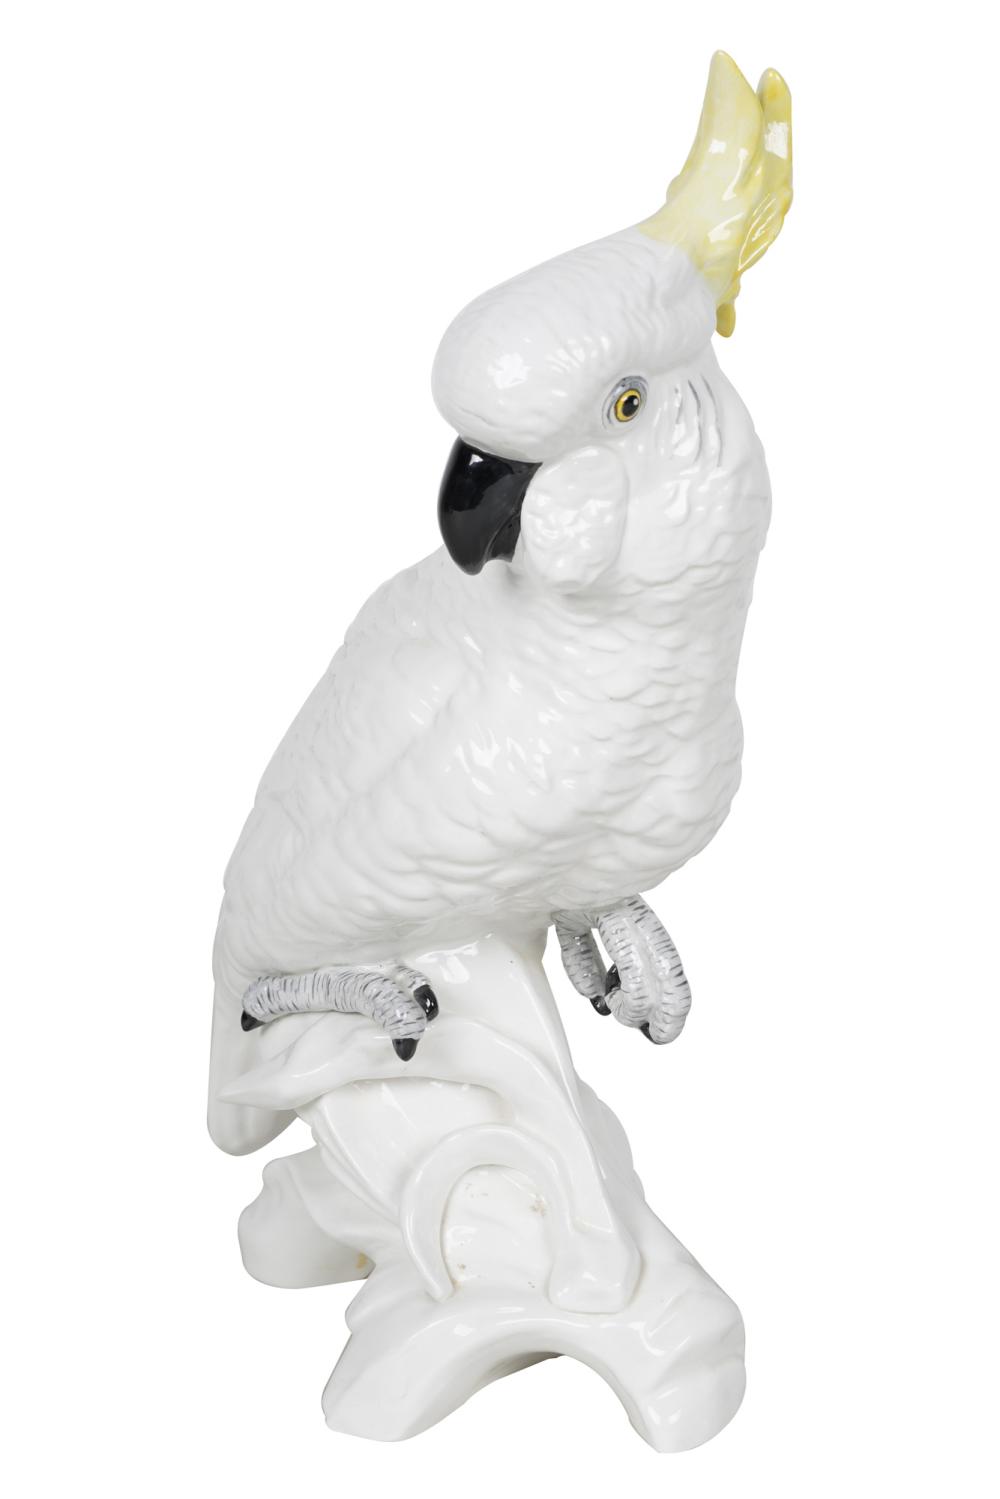 STAFFORDSHIRE COCKATOO13 inches high